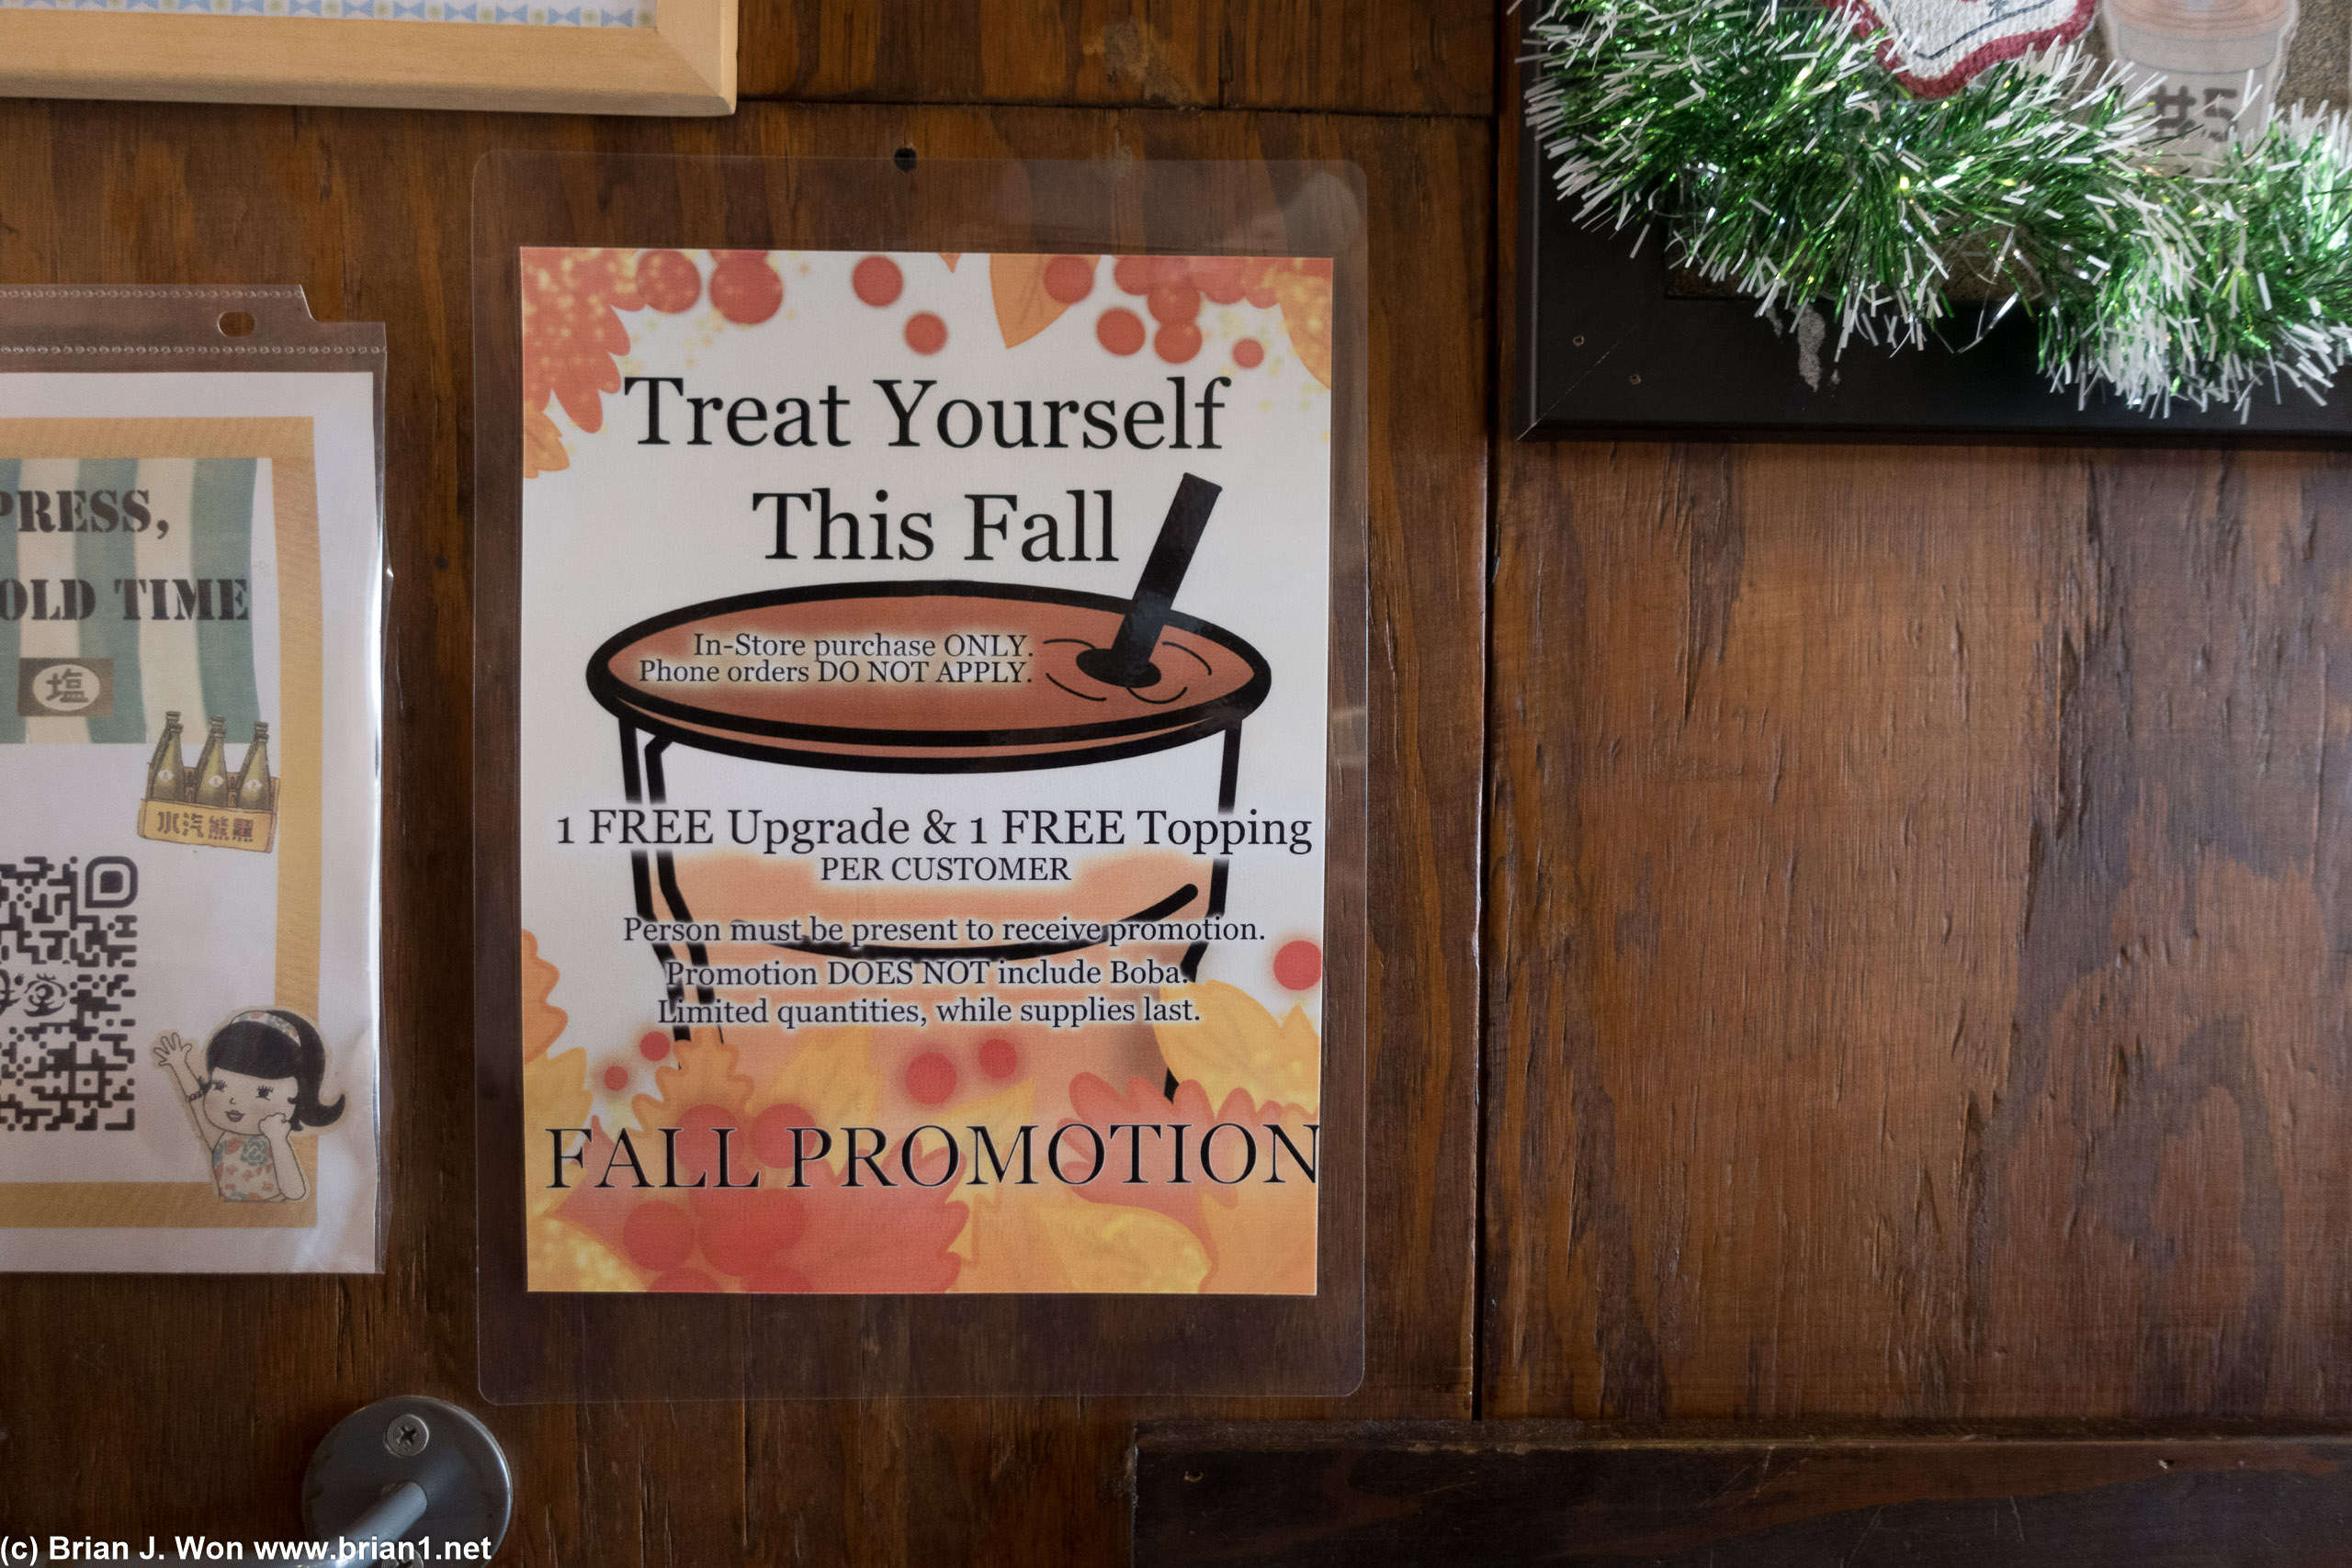 Fall promotion.